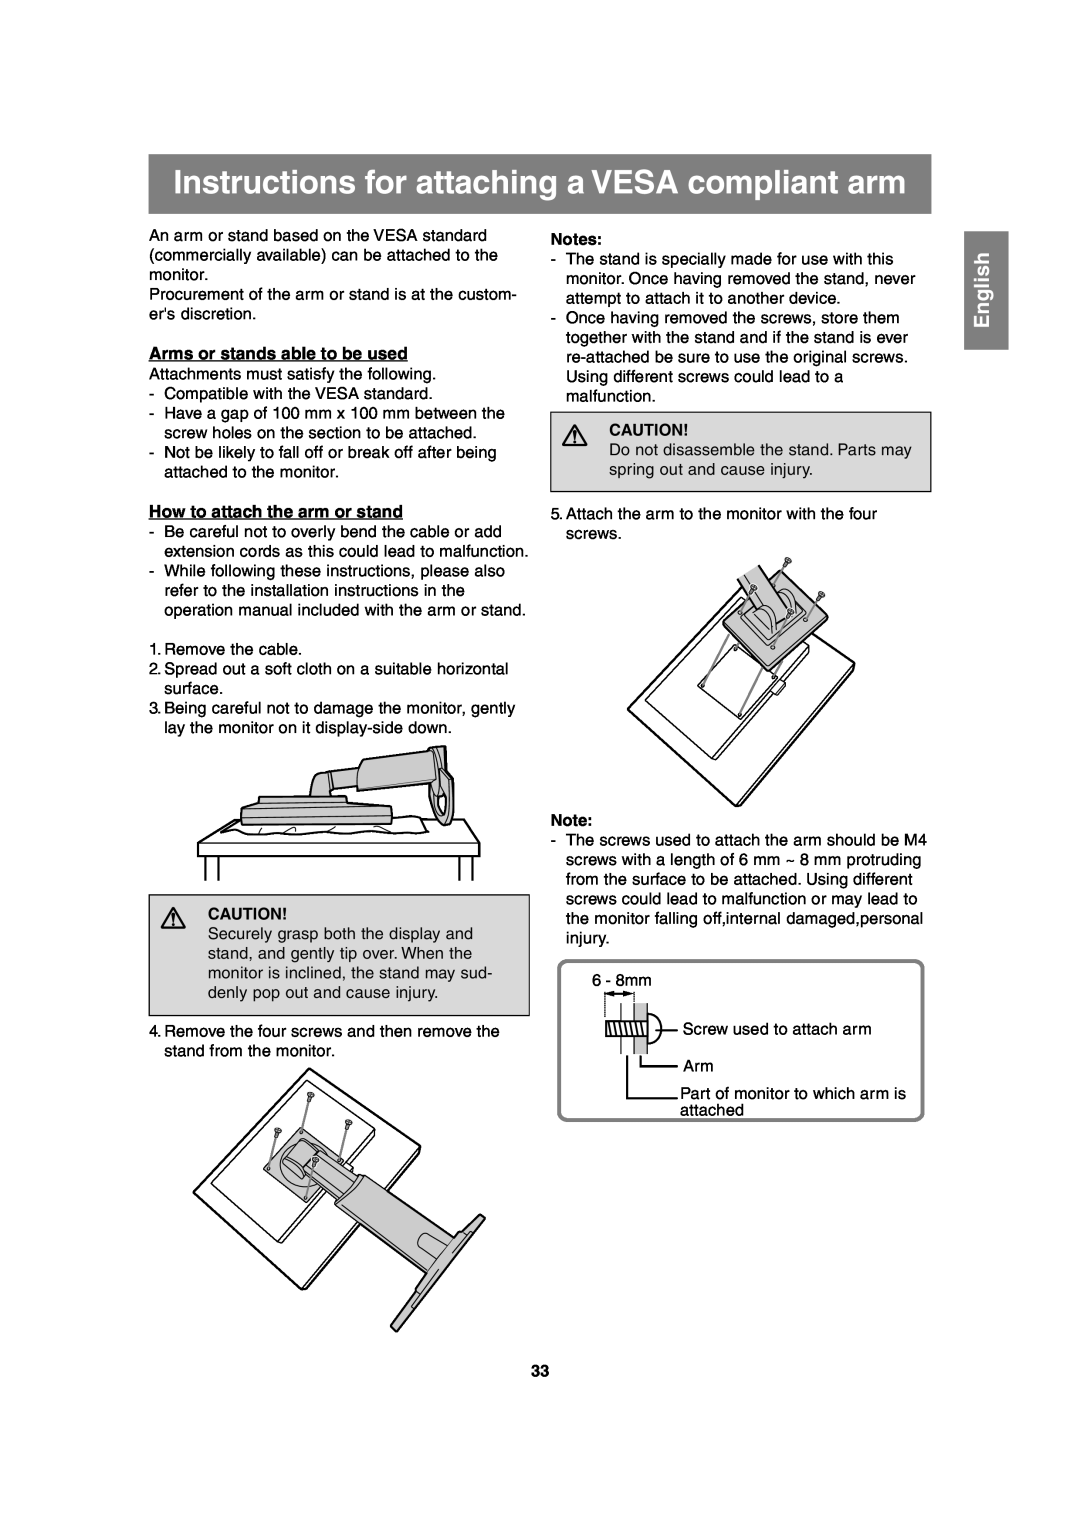 Sharp LL-T2020 operation manual Instructions for attaching a VESA compliant arm, Arms or stands able to be used, English 